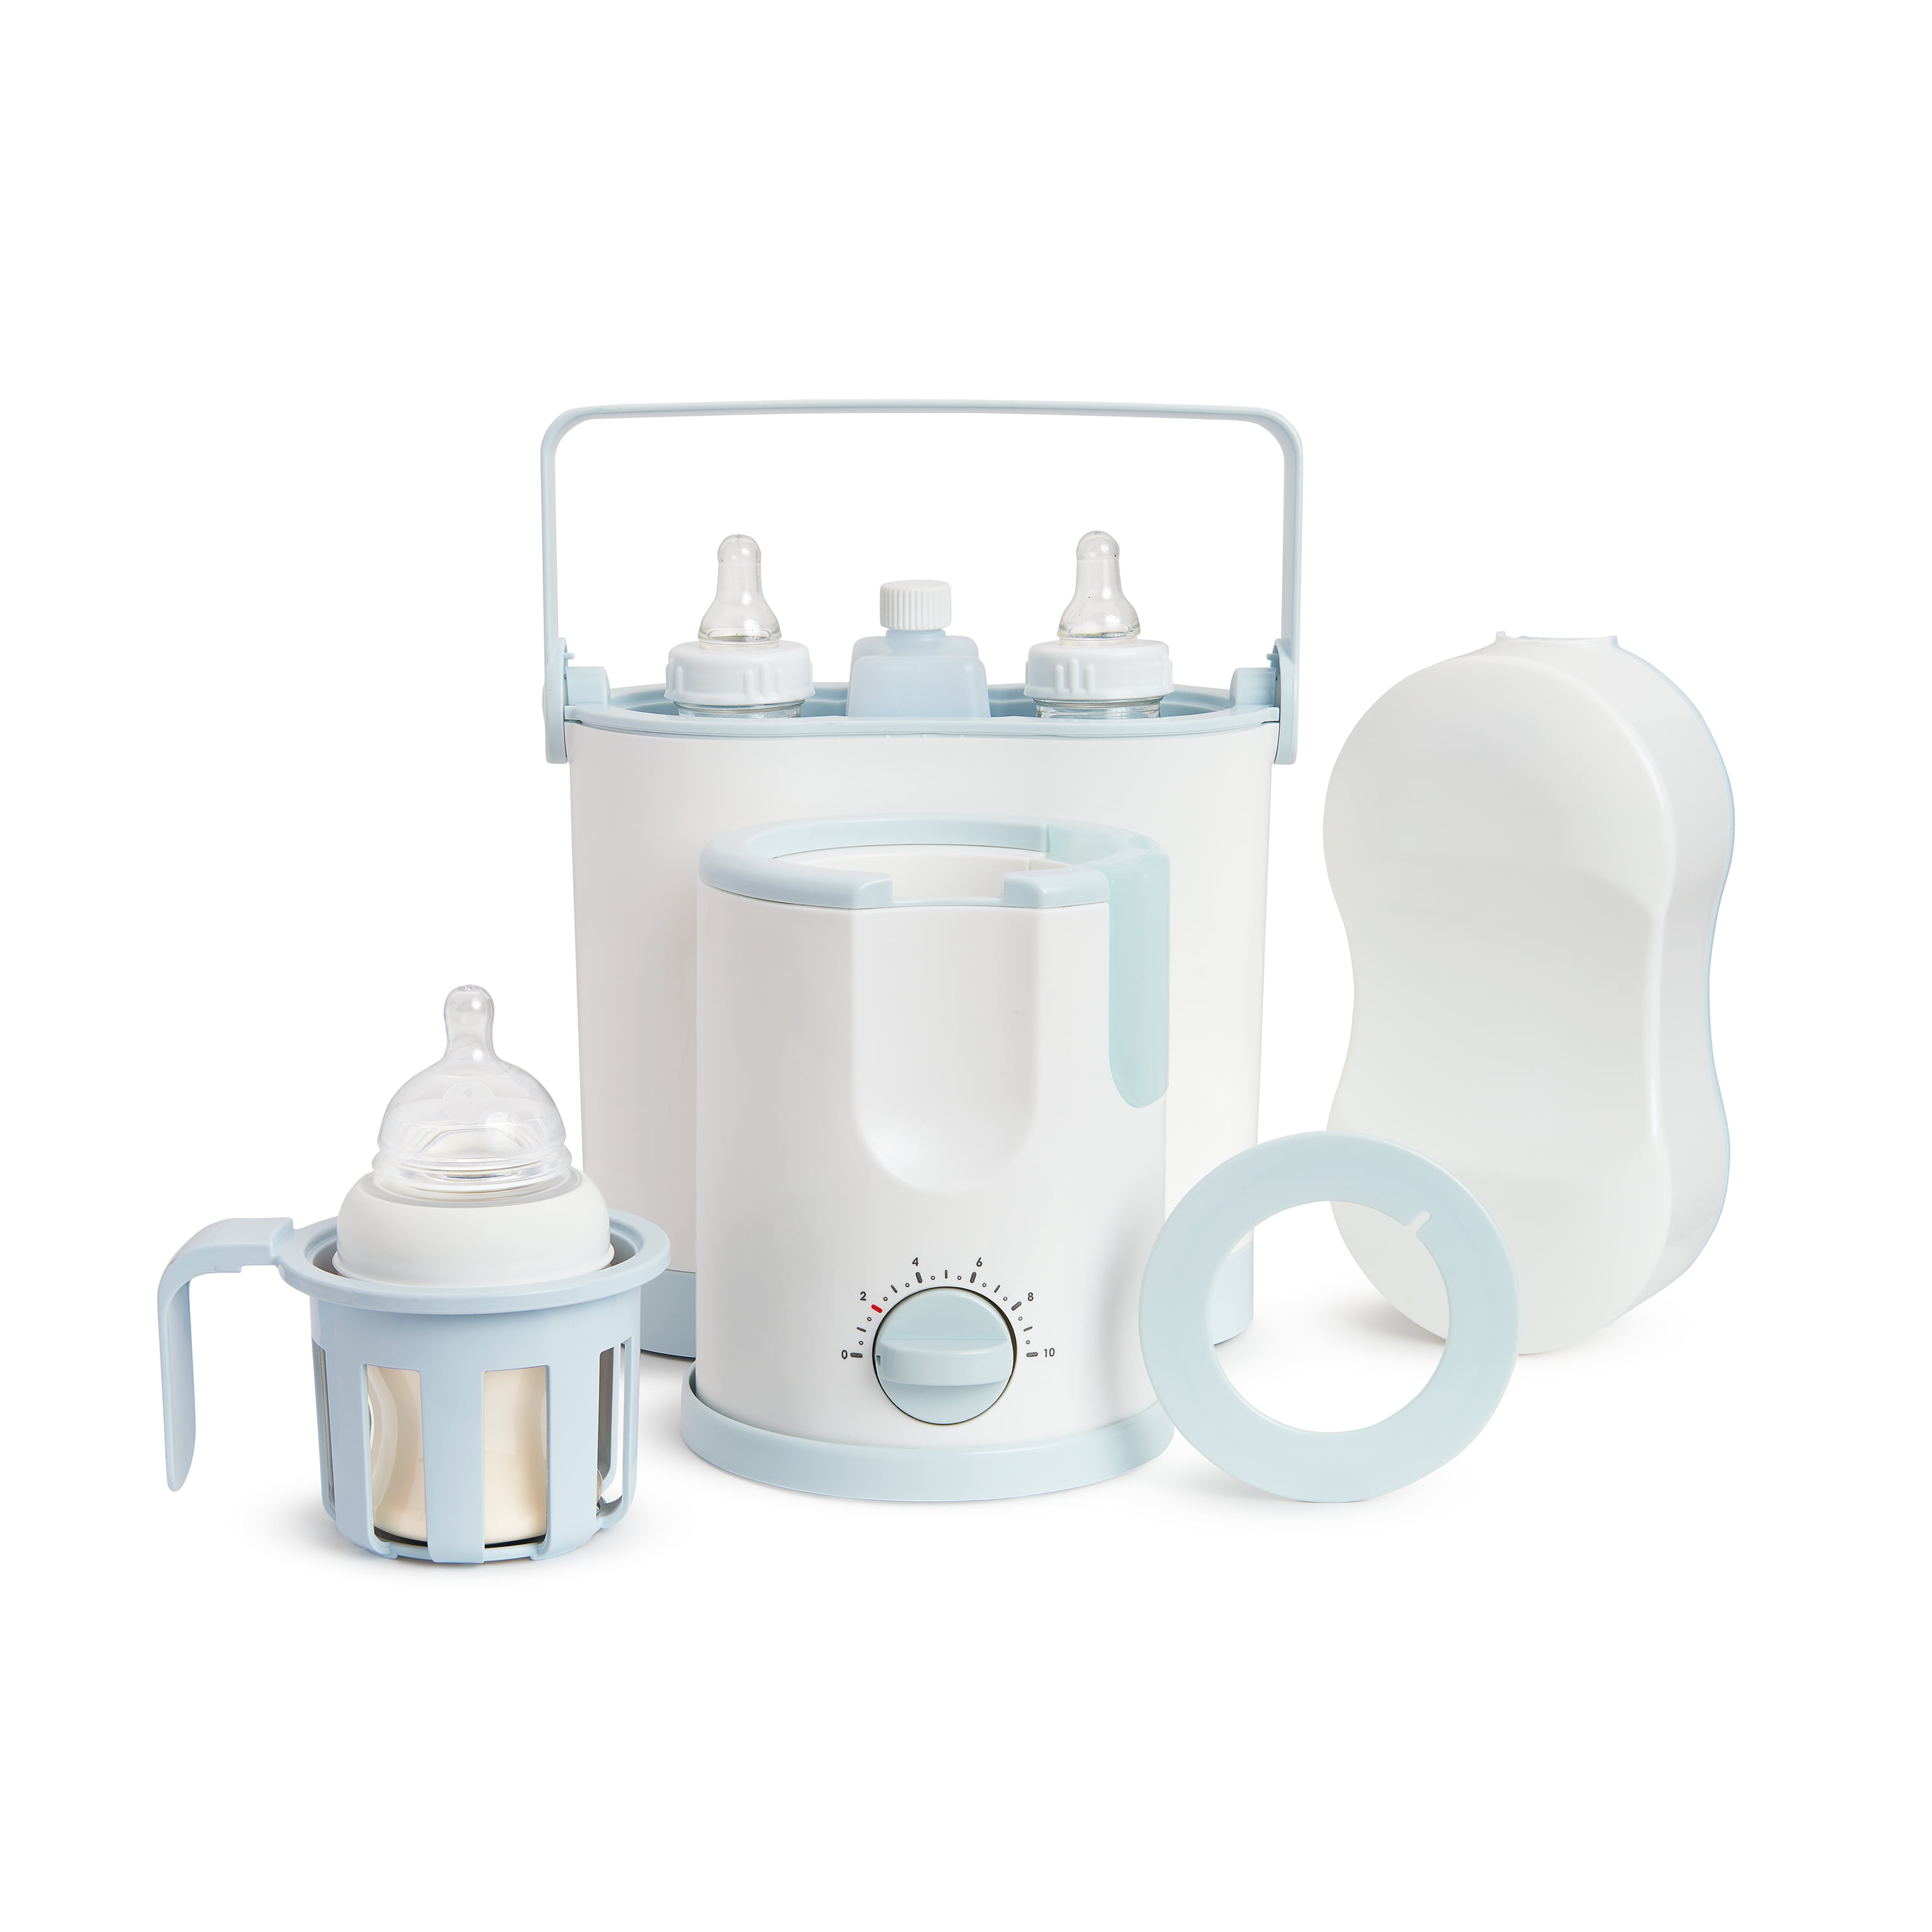 Munchkin Anytime Bottle Warmer and Cooler